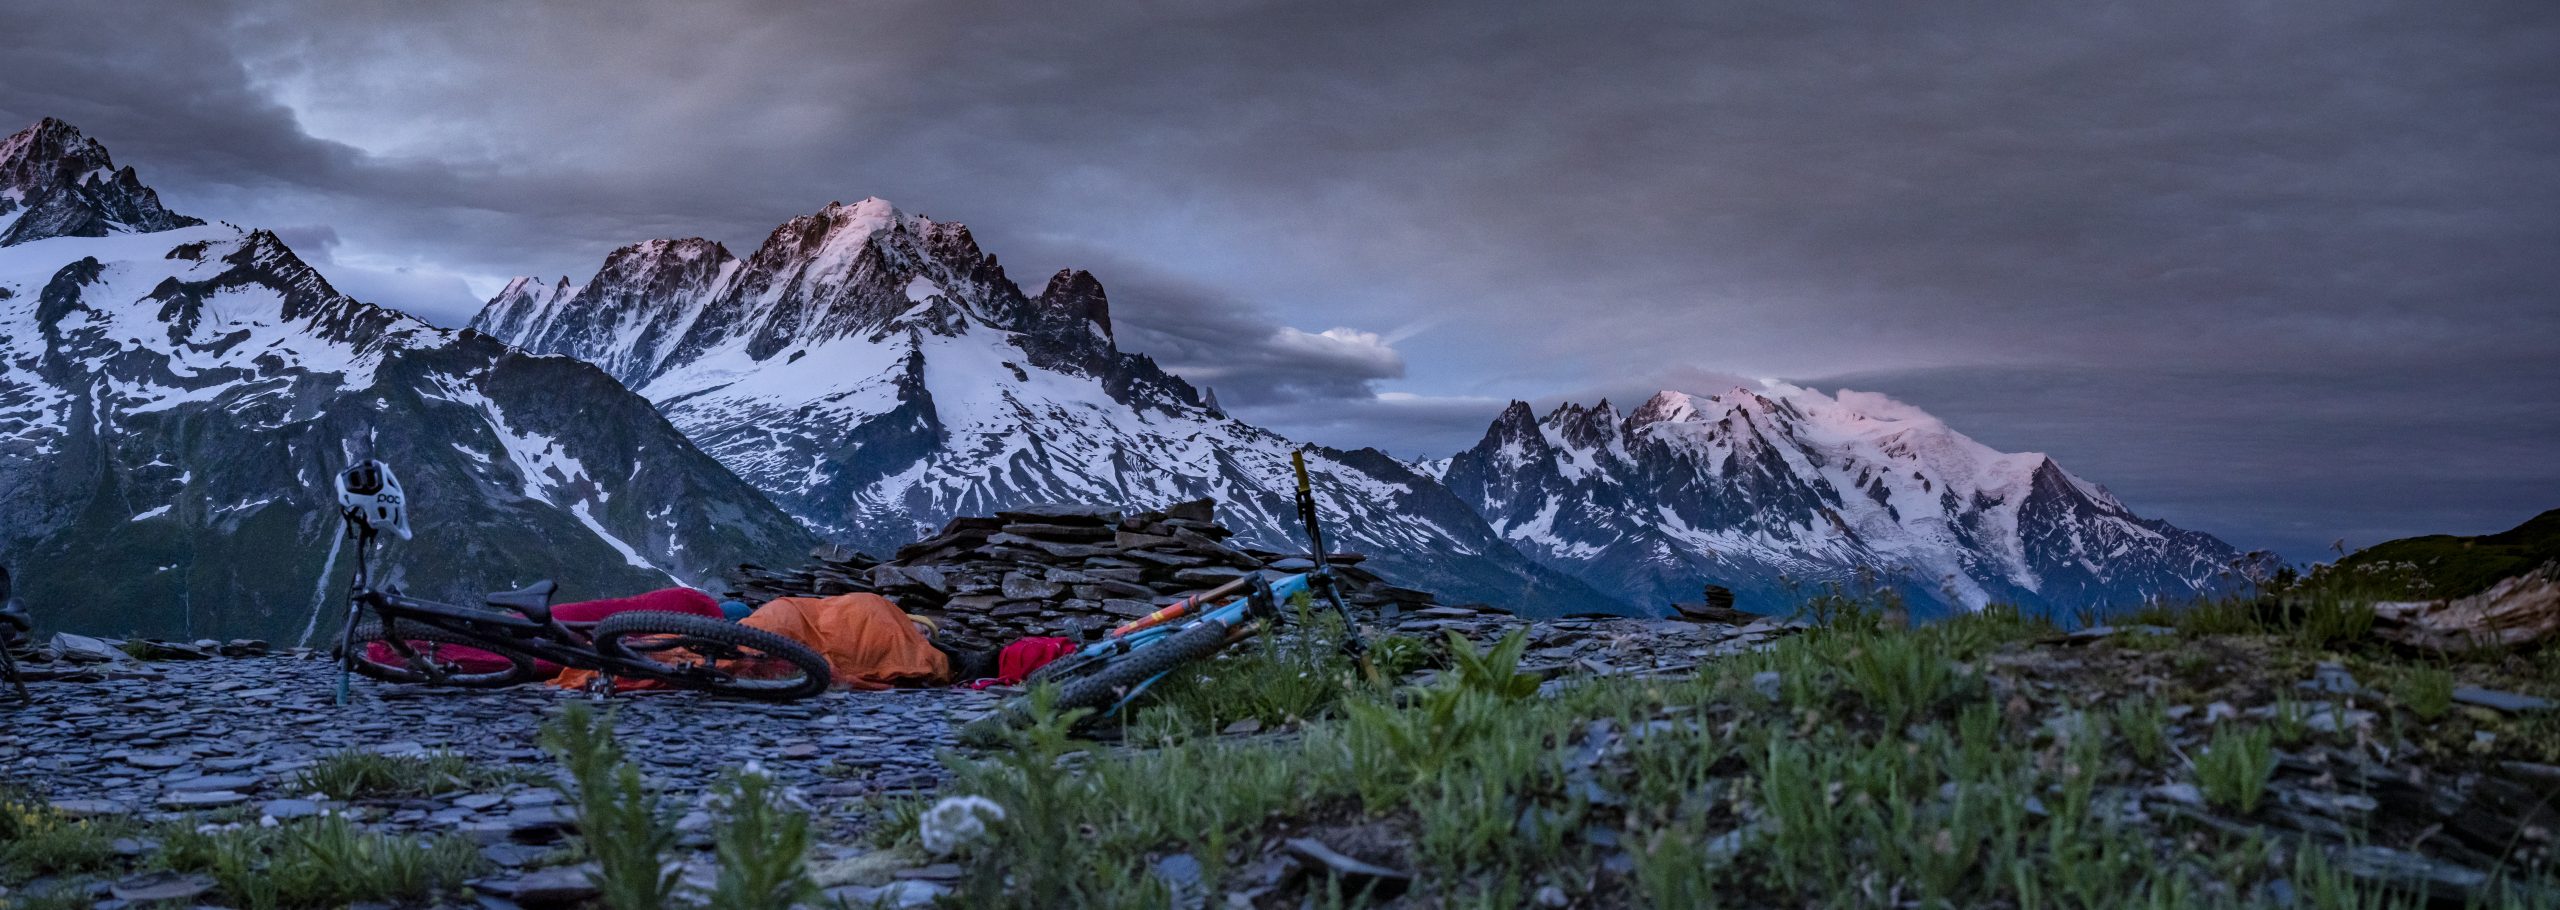 Sleeping under the shadow of Mont Blanc with Dan Milner